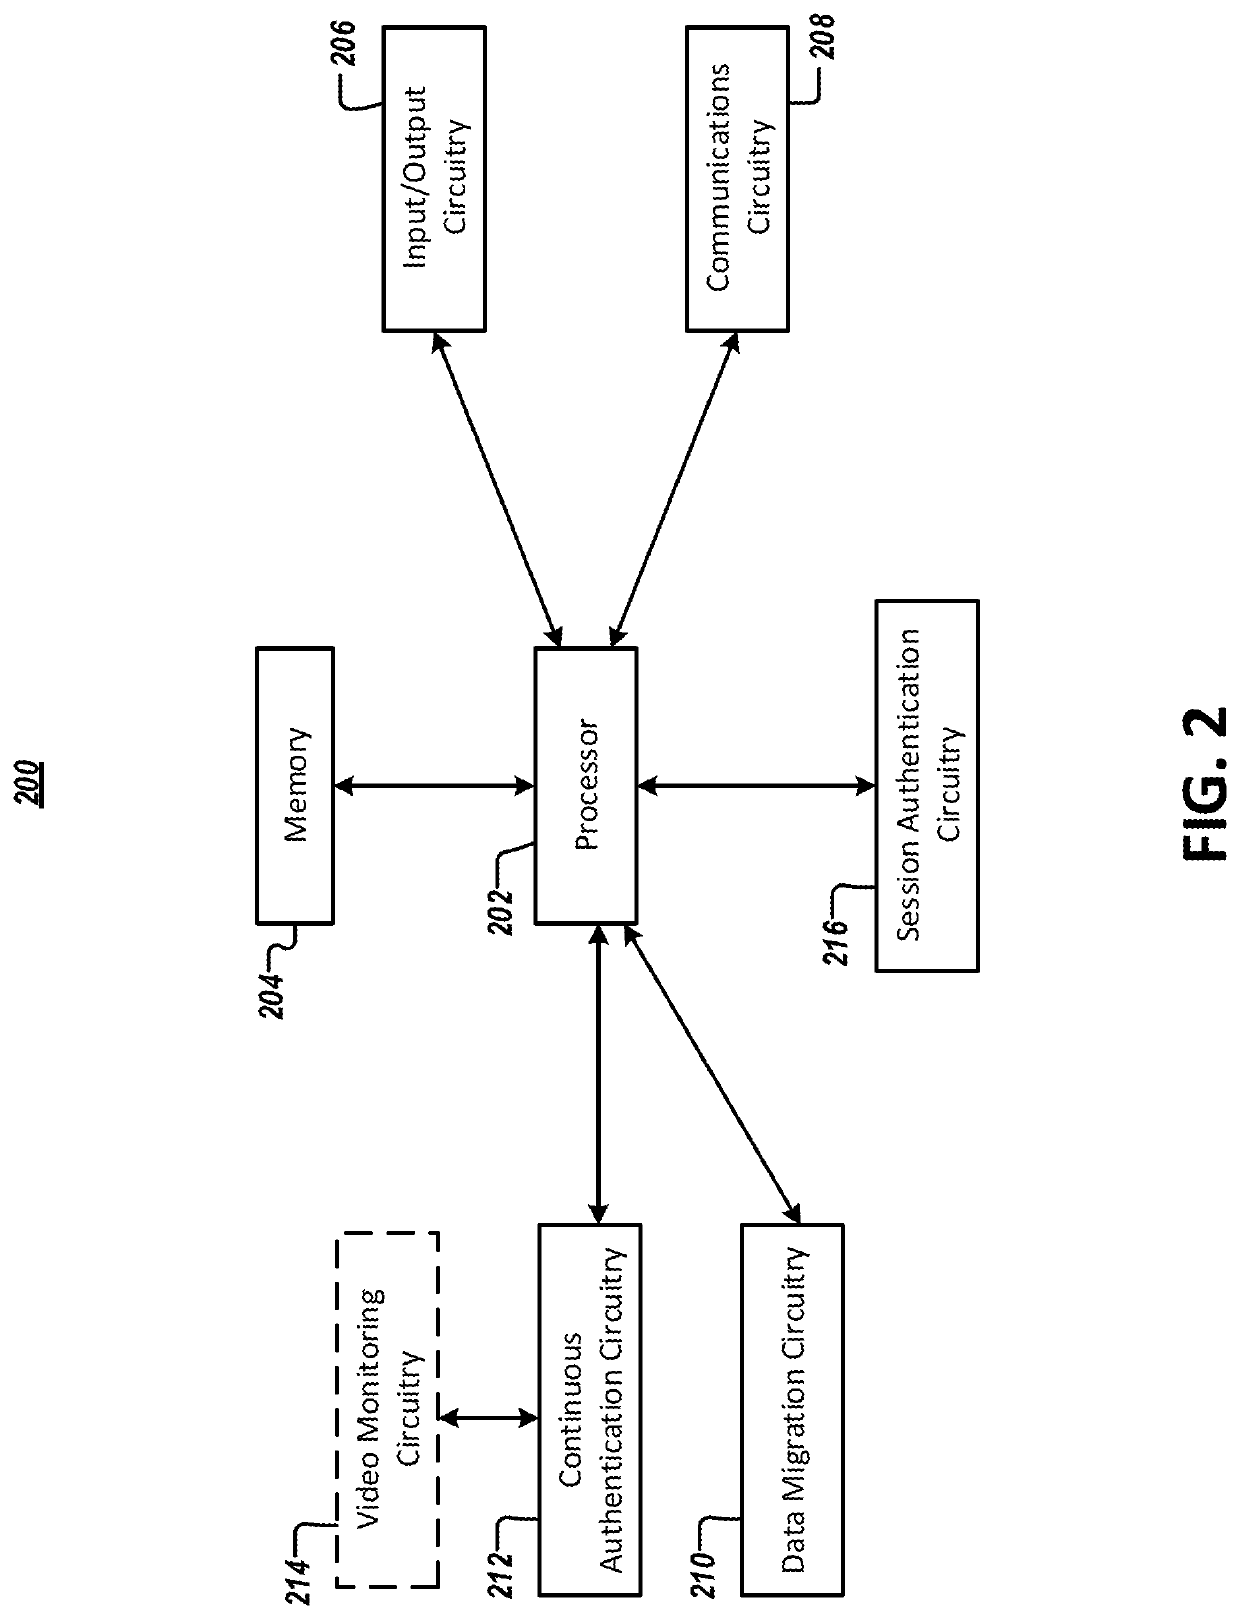 Systems and methods for securely migrating data between devices